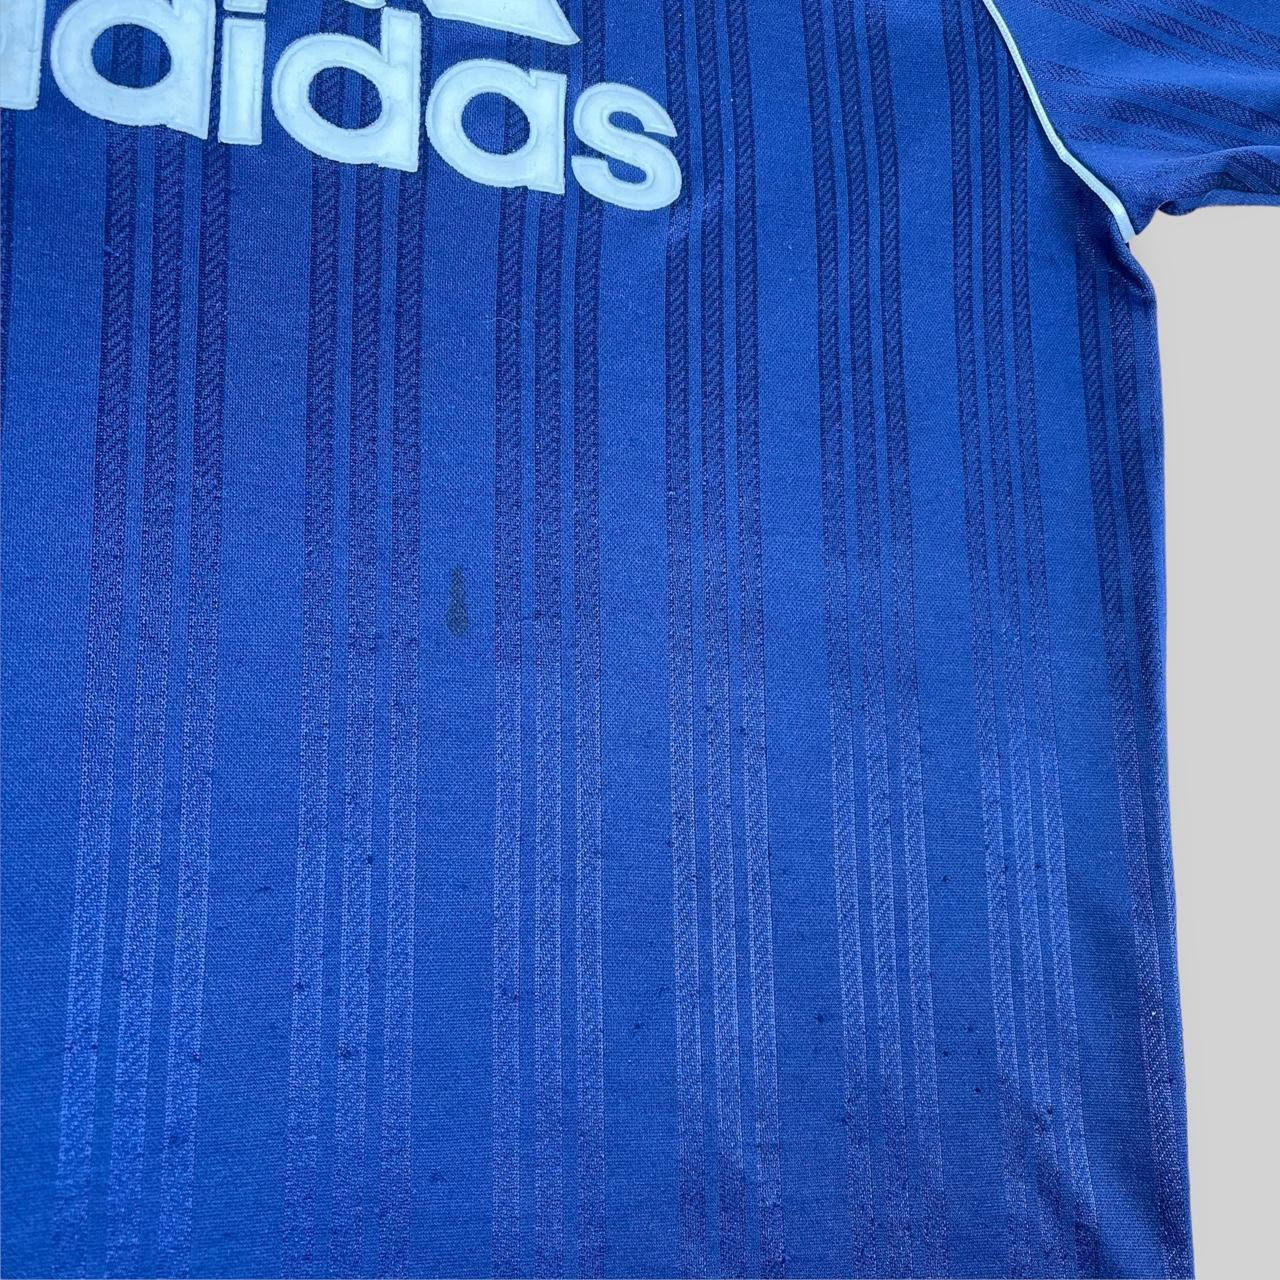 Vintage Adidas Spellout T Shirt (Small)